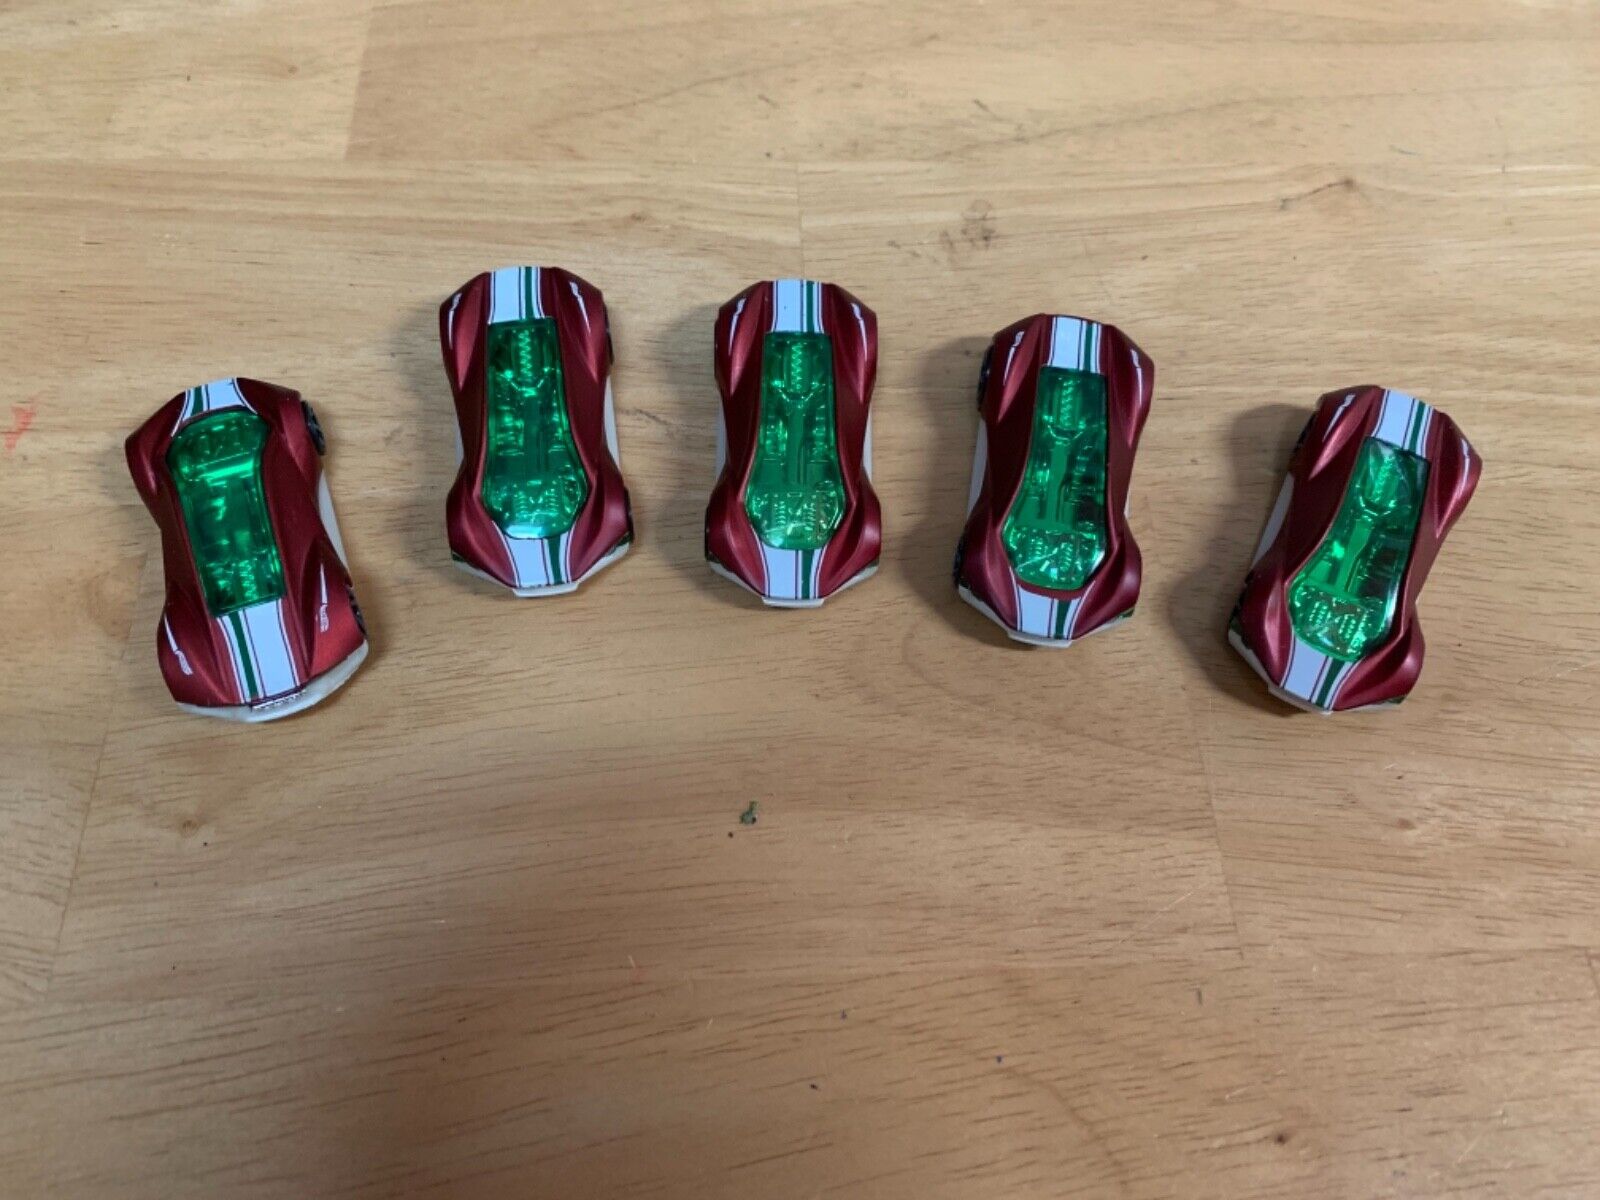 Hotwheels Exotique Loose Lot of 5